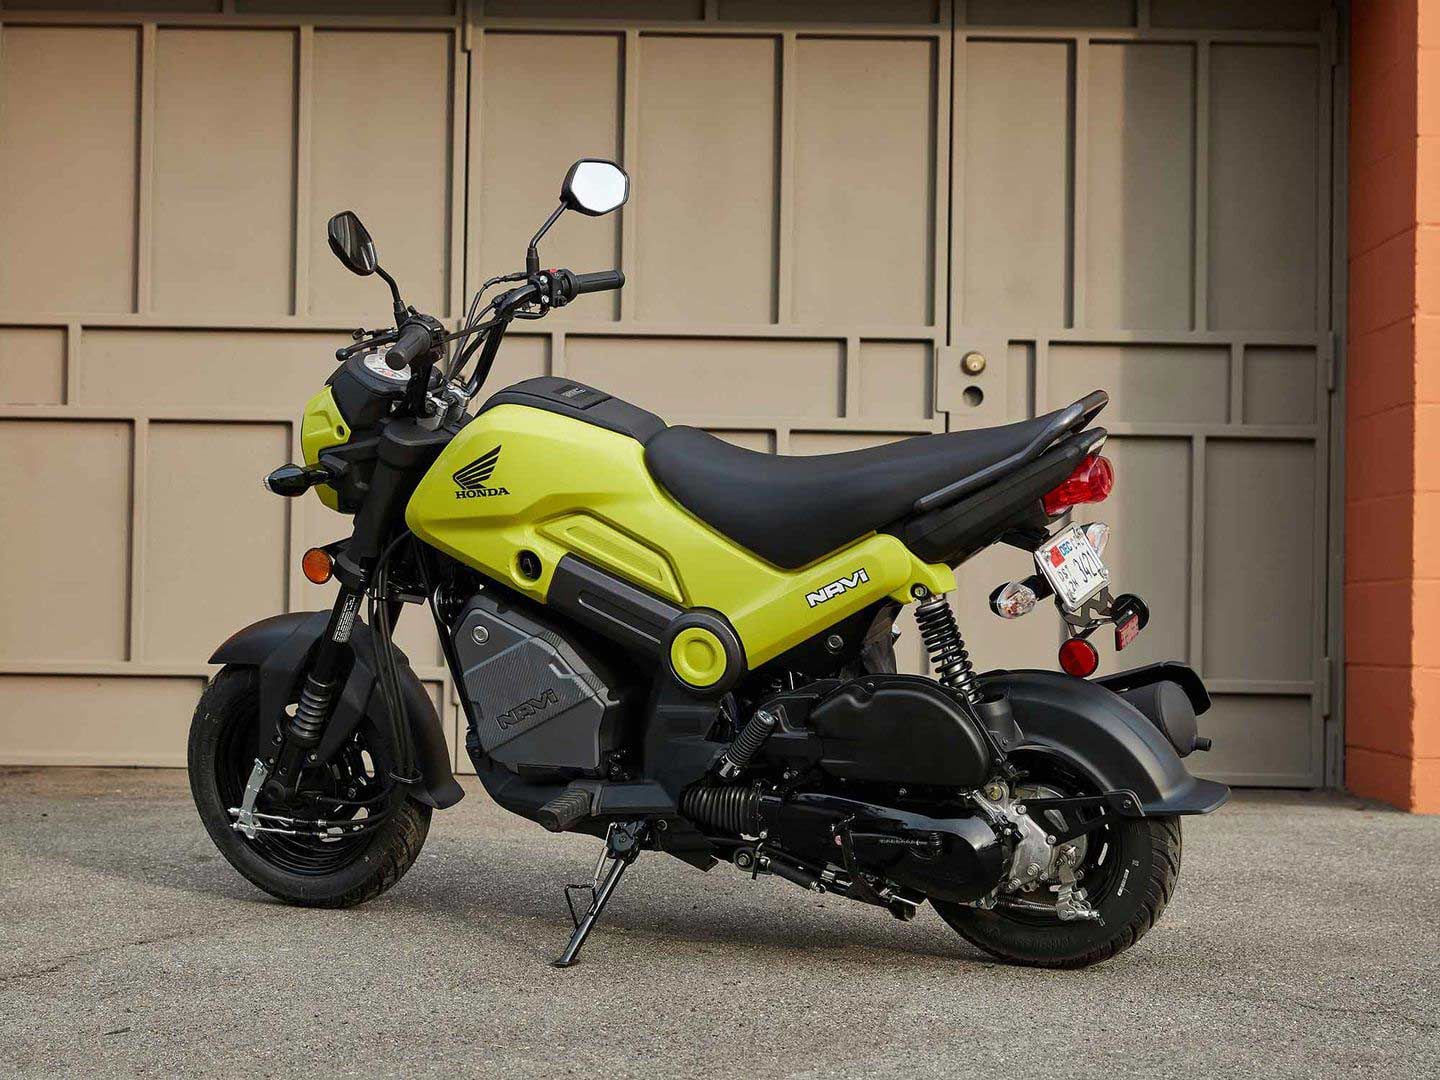 Honda’s Navi was introduced as a cost-effective entry into the wonderful world of motorcycling. Compared to using public transportation or rideshare apps for a month, owning a Navi compares favorably, even when factoring in registration and insurance. Notice the 15-liter storage compartment that adds versatility.